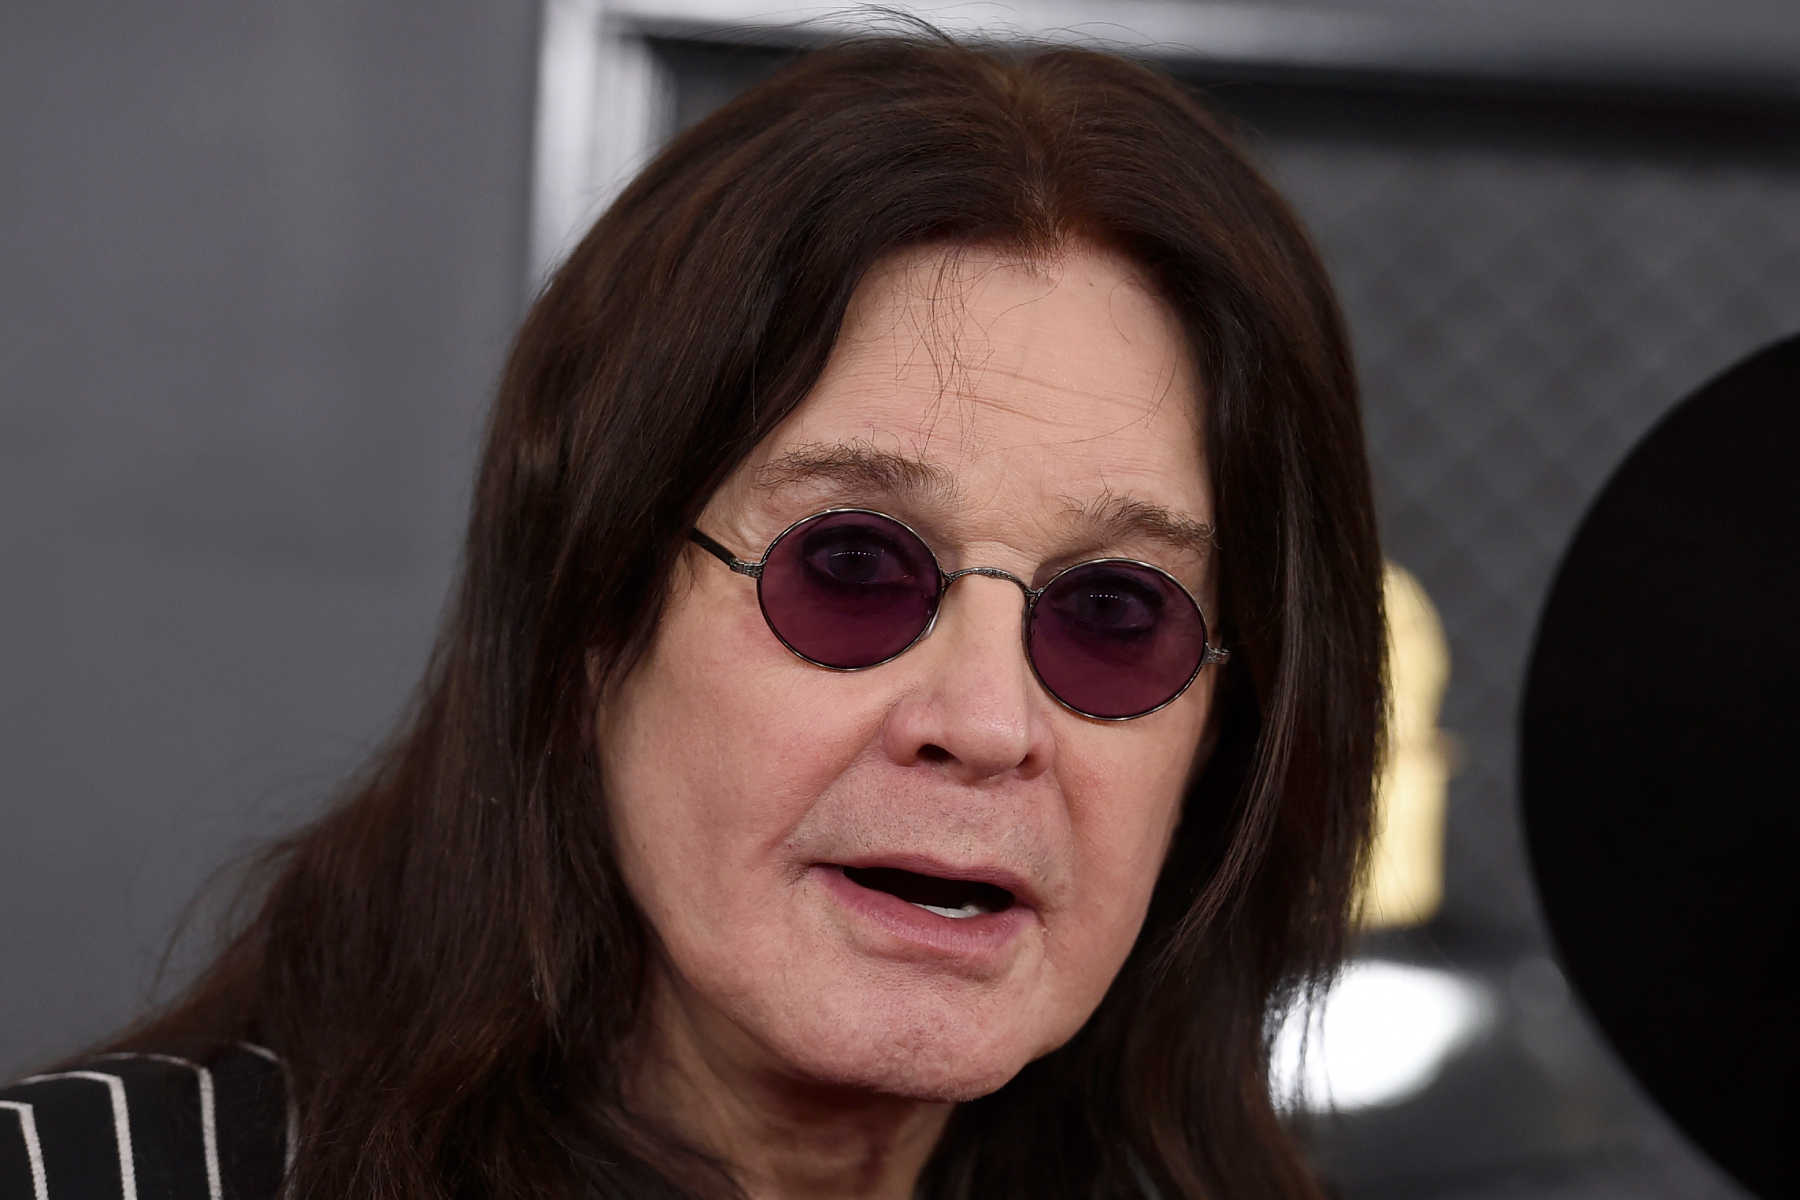 Ozzy Osbourne is ‘Recuperating Comfortably’ at Home Following Surgery